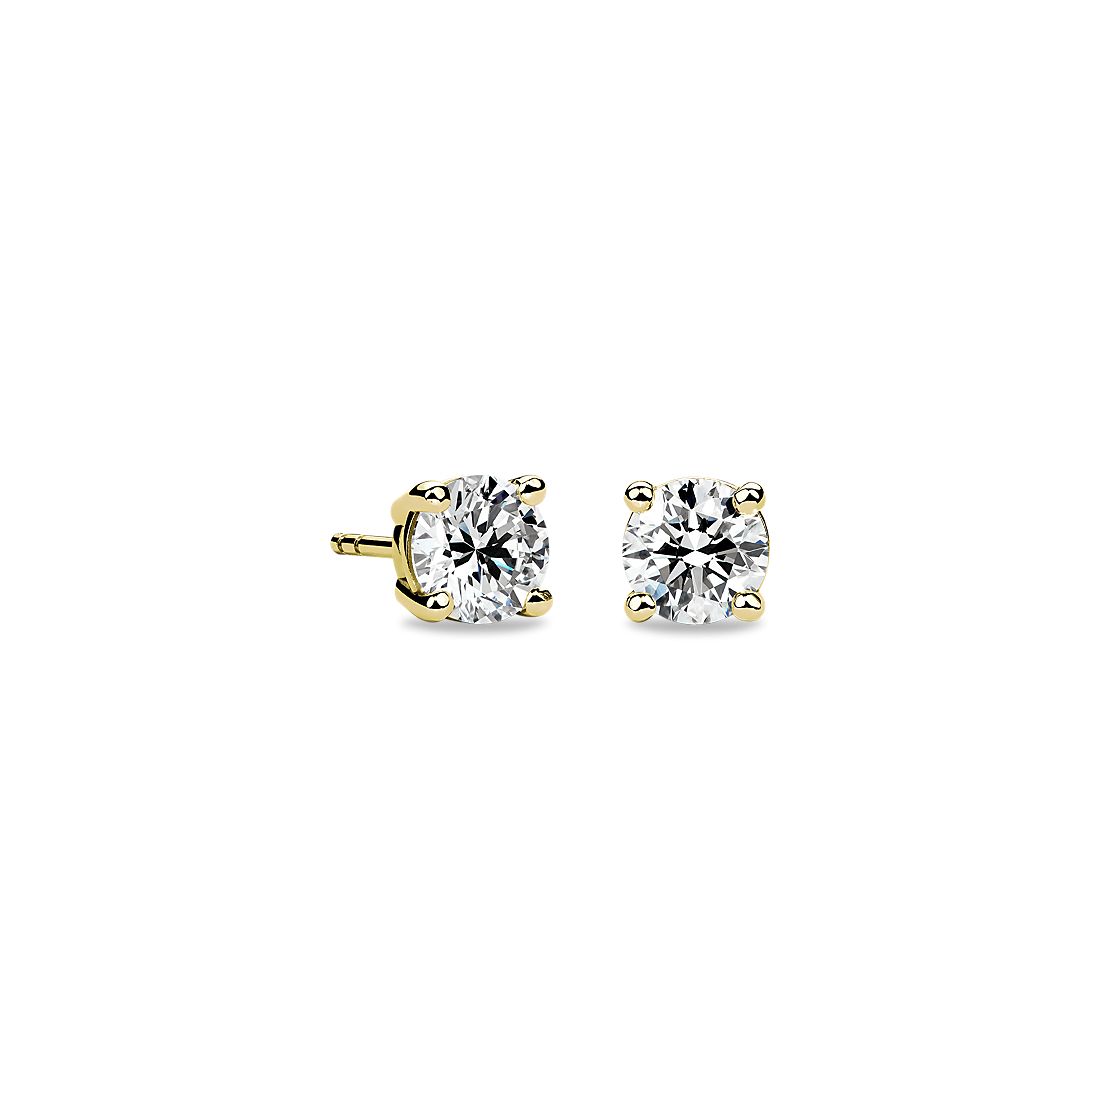 14k Yellow Gold Four-Claw Diamond Stud Earrings (1.54 ct. tw.)